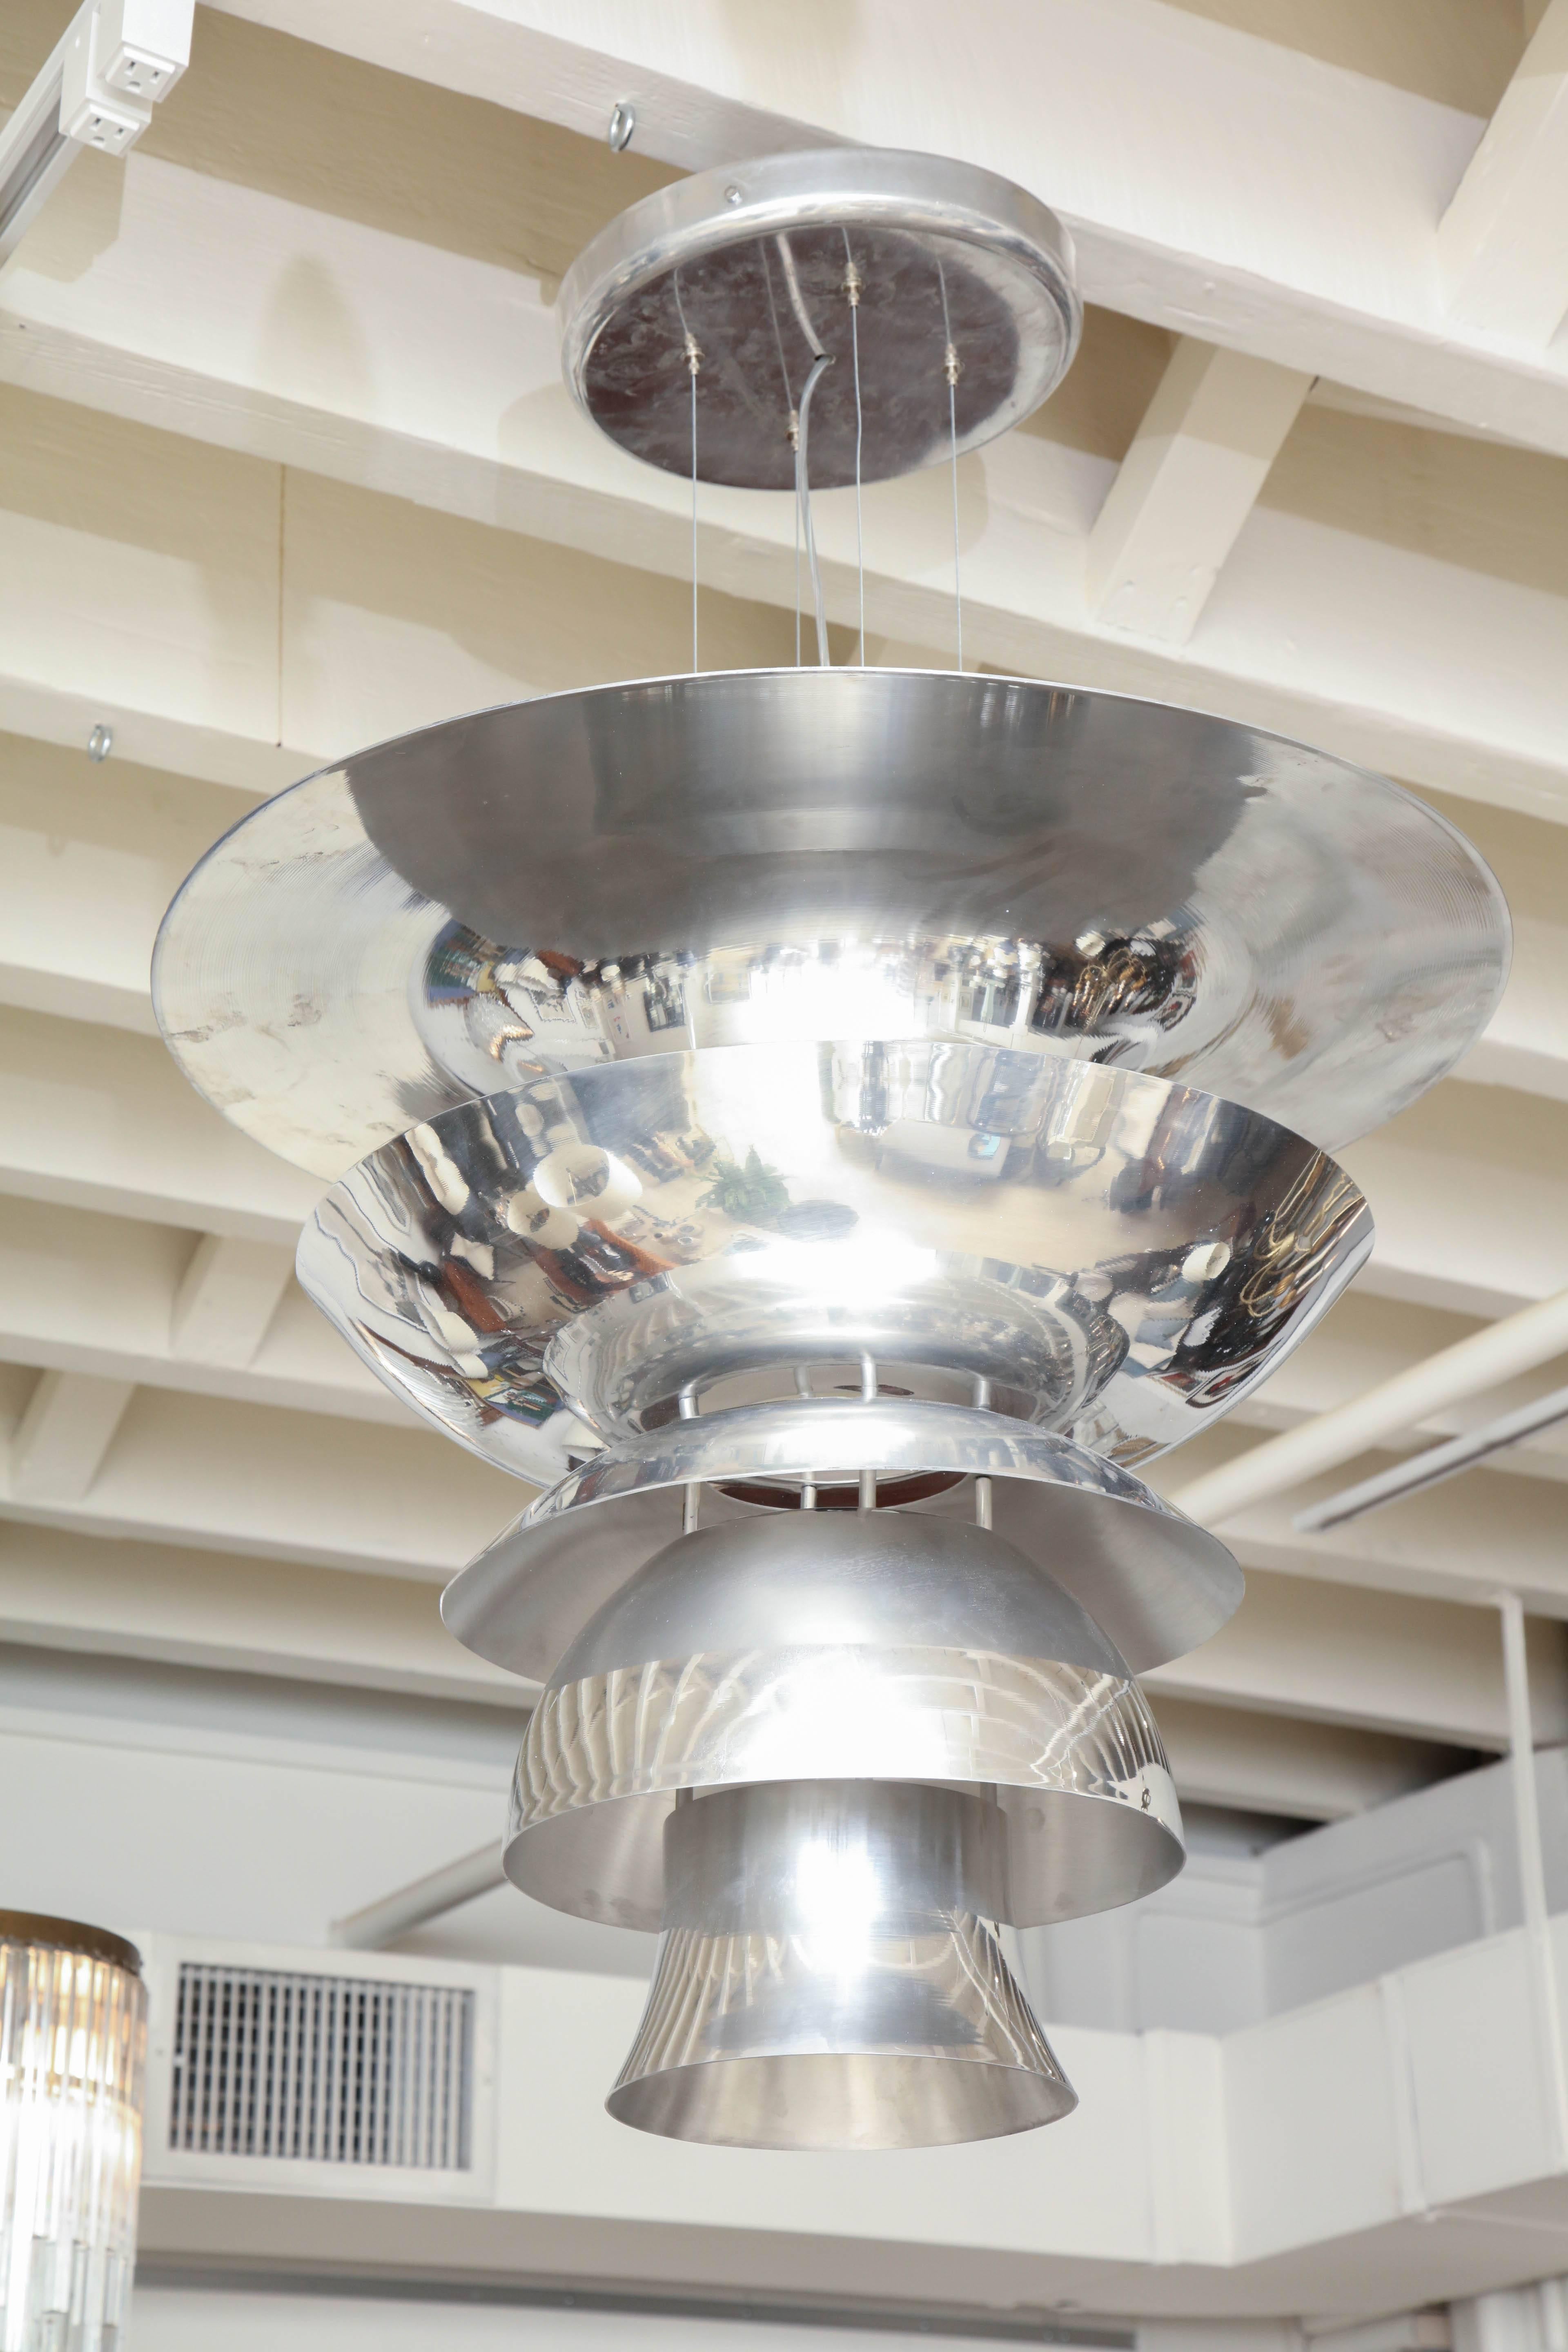 Large multi-tiered aluminum pendant light fixture. Newly rewired for US specifications. Height adjustable from canopy to light fixture.
.



Available to see in our NYC Showroom 
BK Antiques
306 East 61st St. 2nd fl.
New York, NY 10065